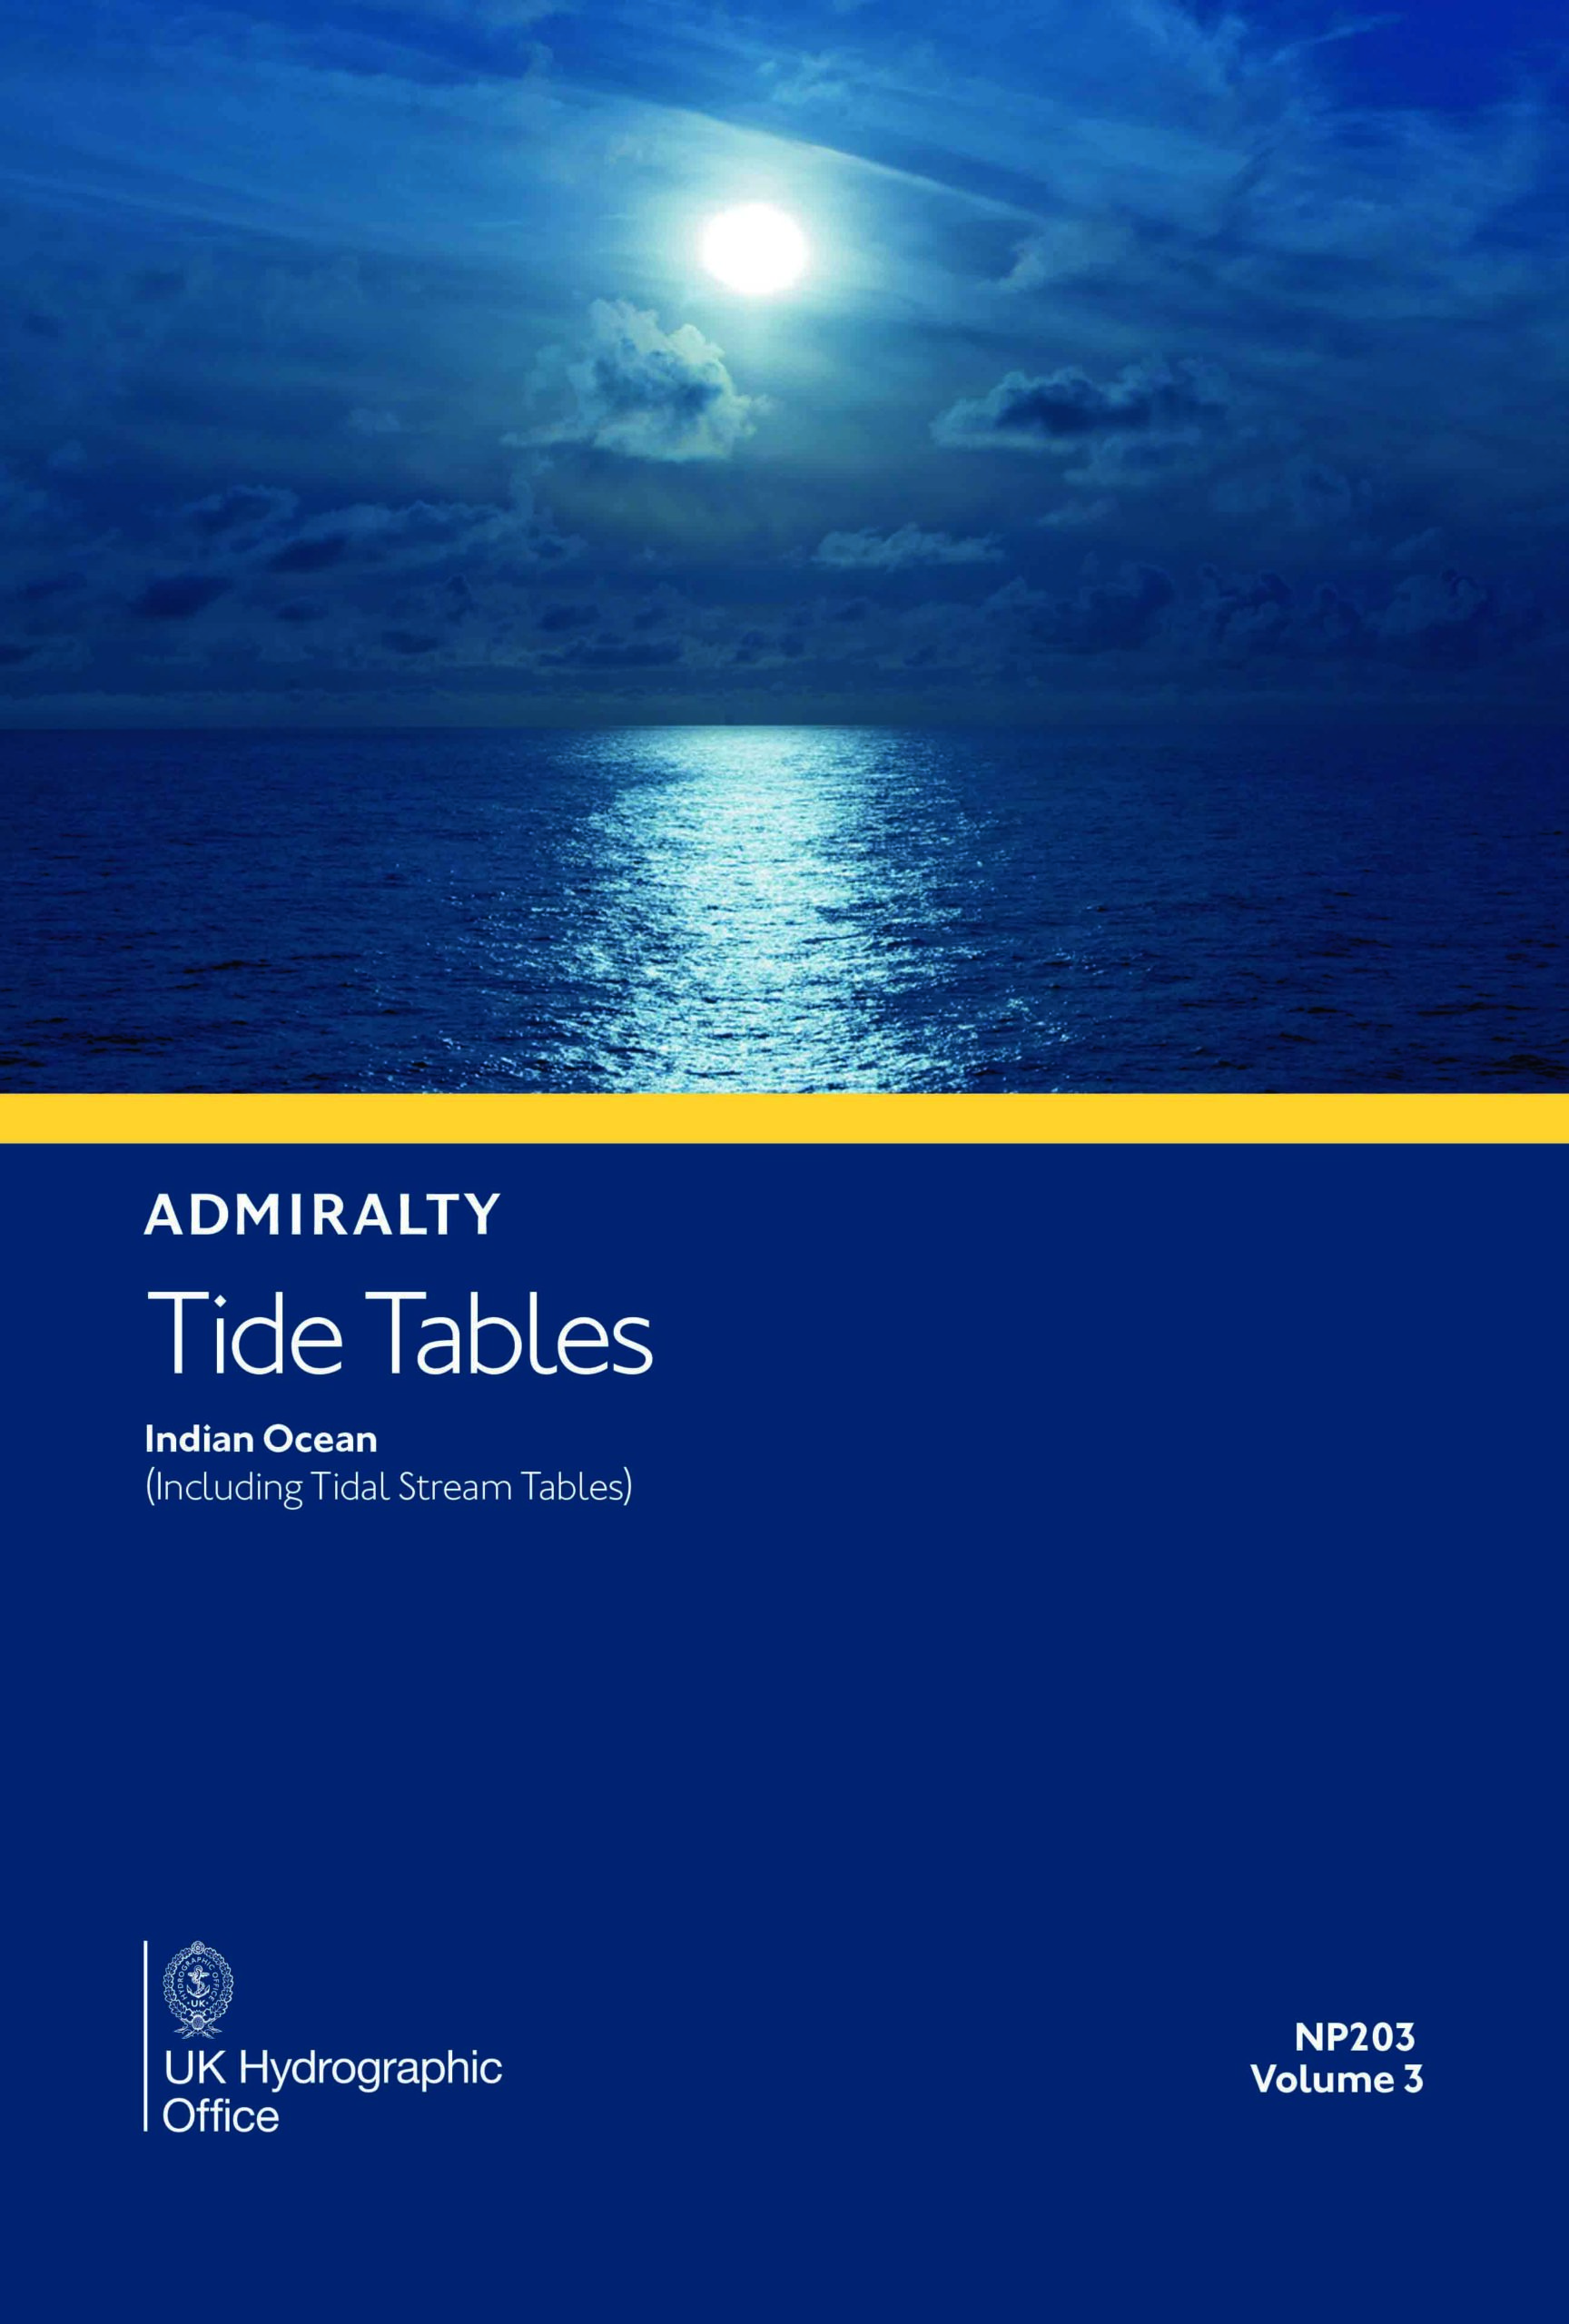 NP203 Admiralty Tide Tables (incl. Tidal Stream Tables) Volume 3 2025